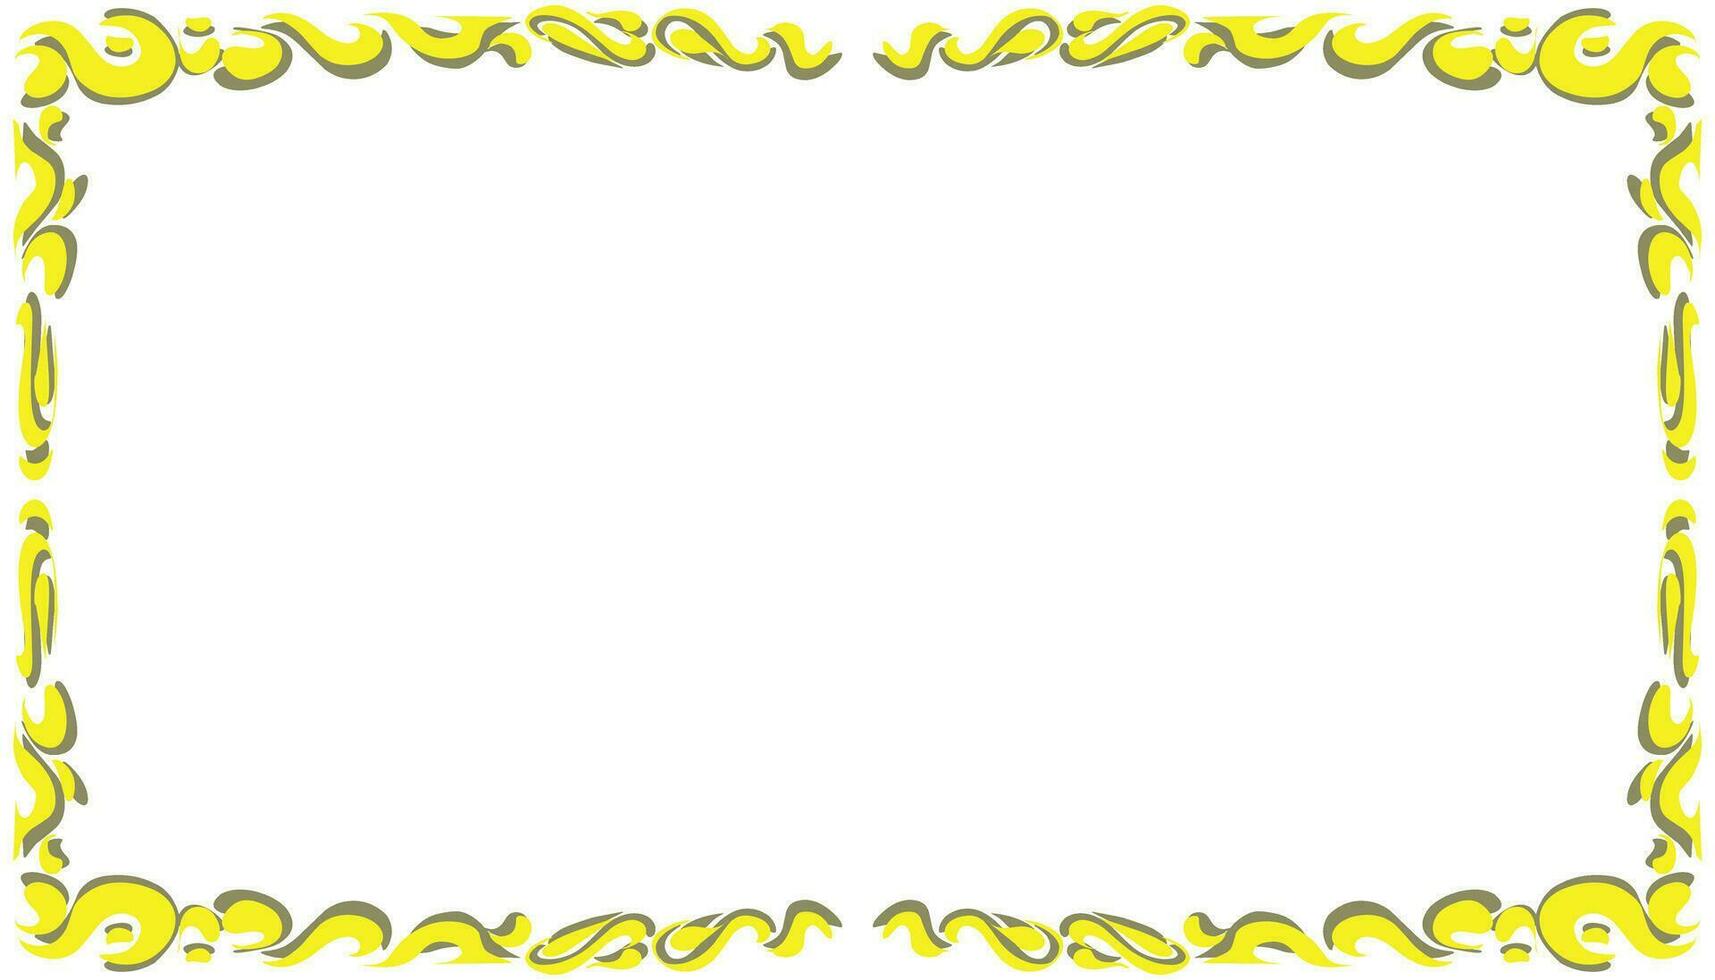 Abstract background illustration with yellow frame. Perfect for magazine background, poster, website, book cover vector